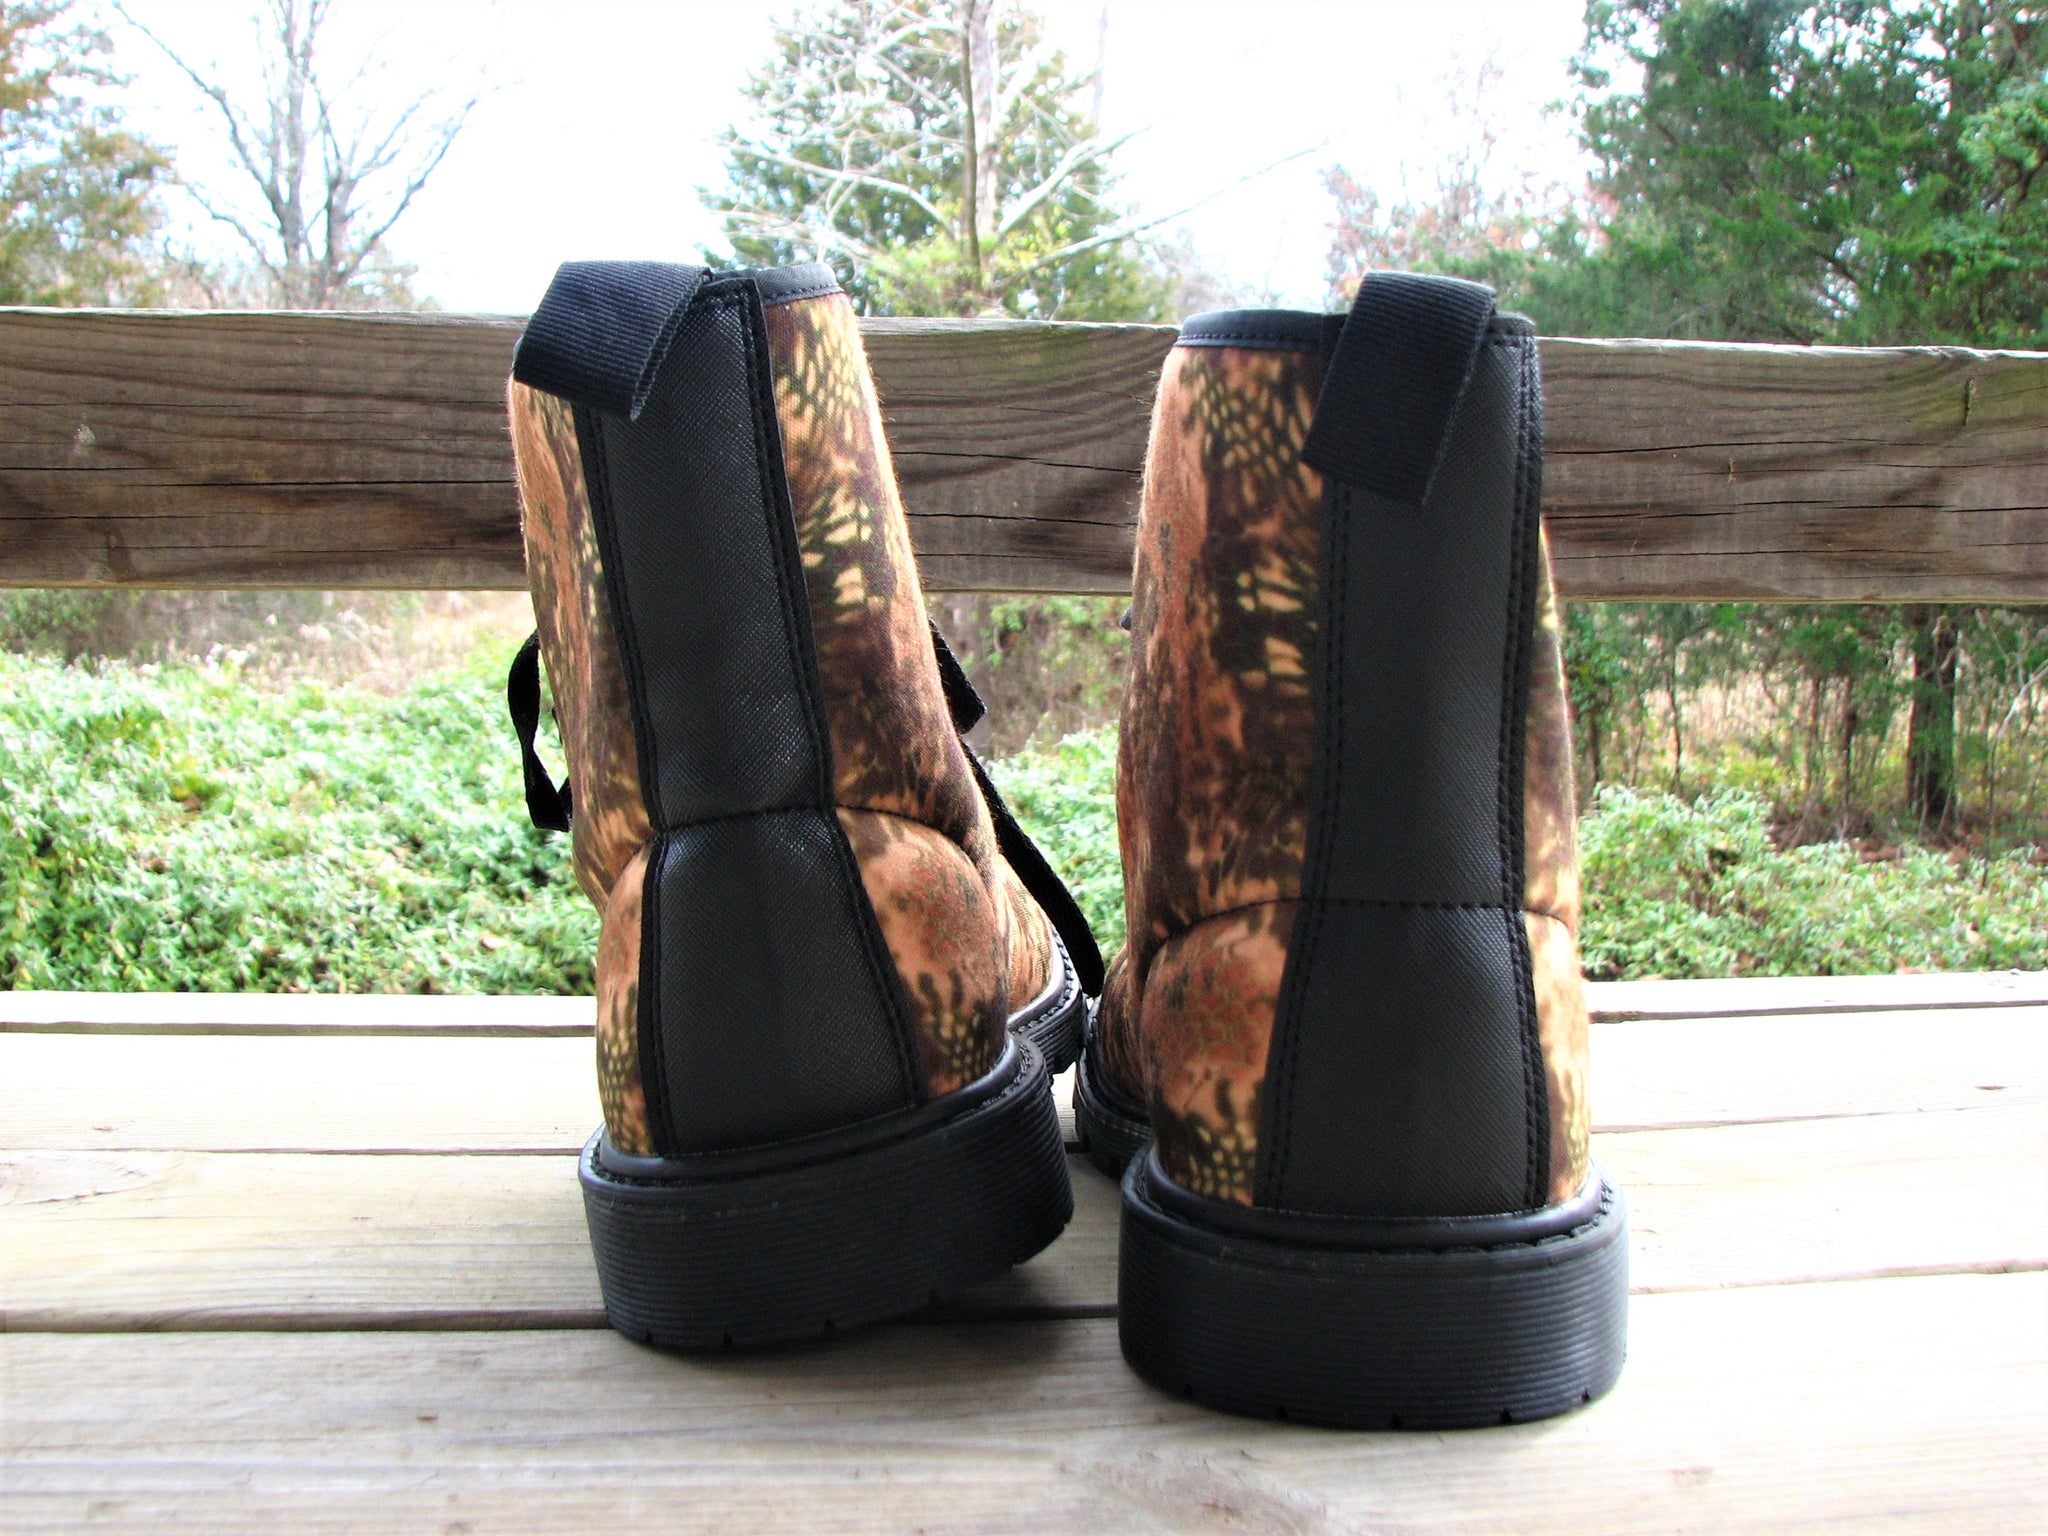 Dry Country Camo Canvas Boots